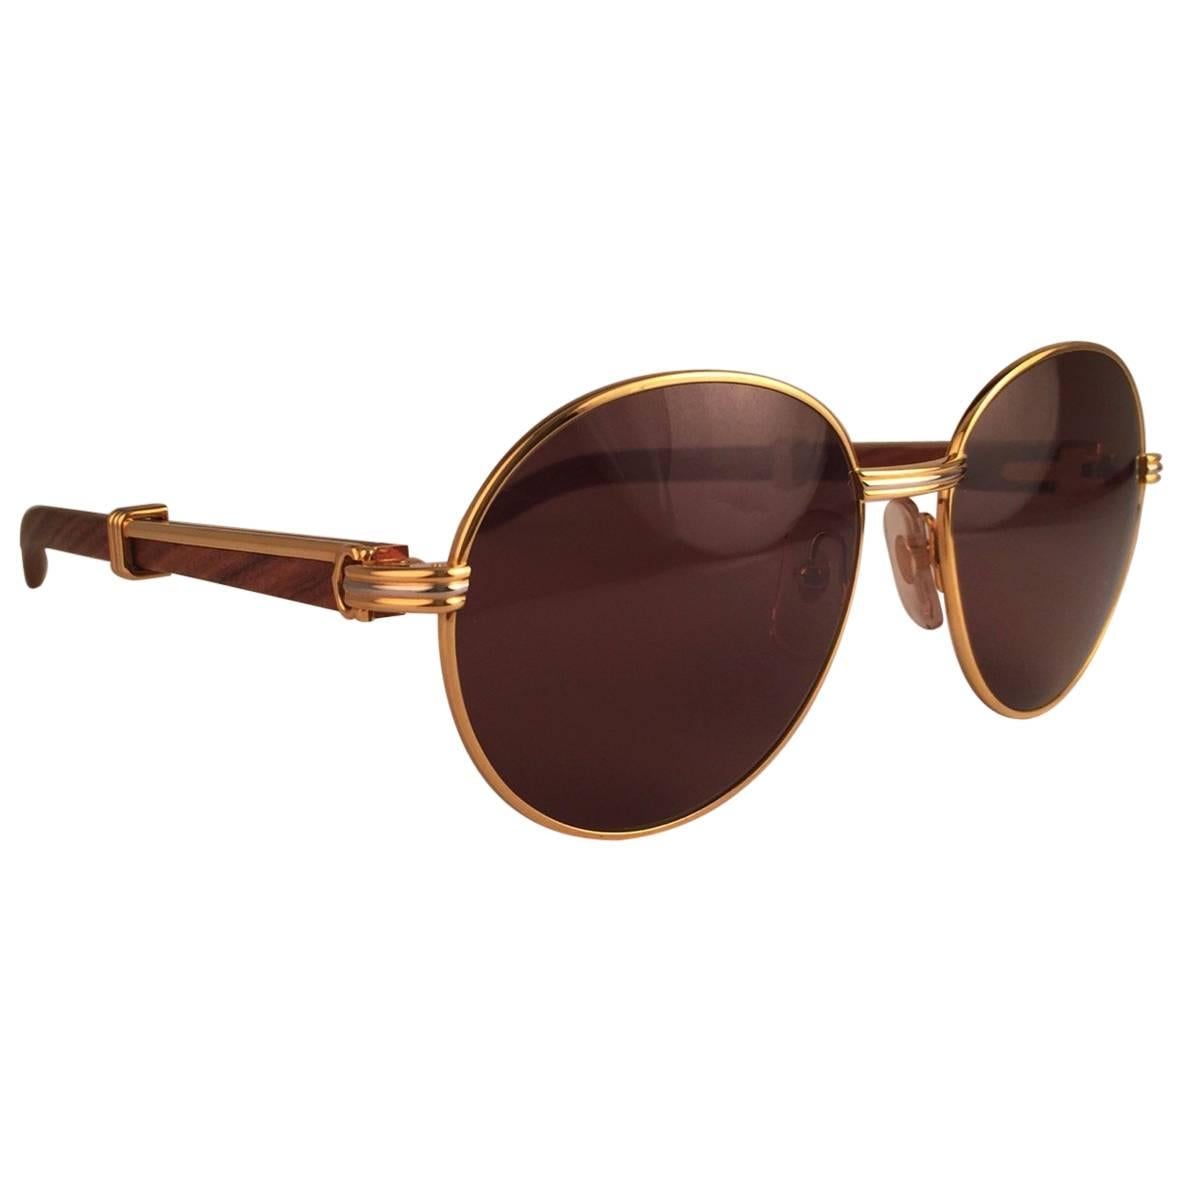 New original 1990 Cartier Bagatelle Wood Sunglasses from the coveted Precious Wood series with palisander wood temples and honey brown (uv protection) lenses. 
The frame has the front and sides in yellow and white gold. 
All hallmarks. gold Cartier